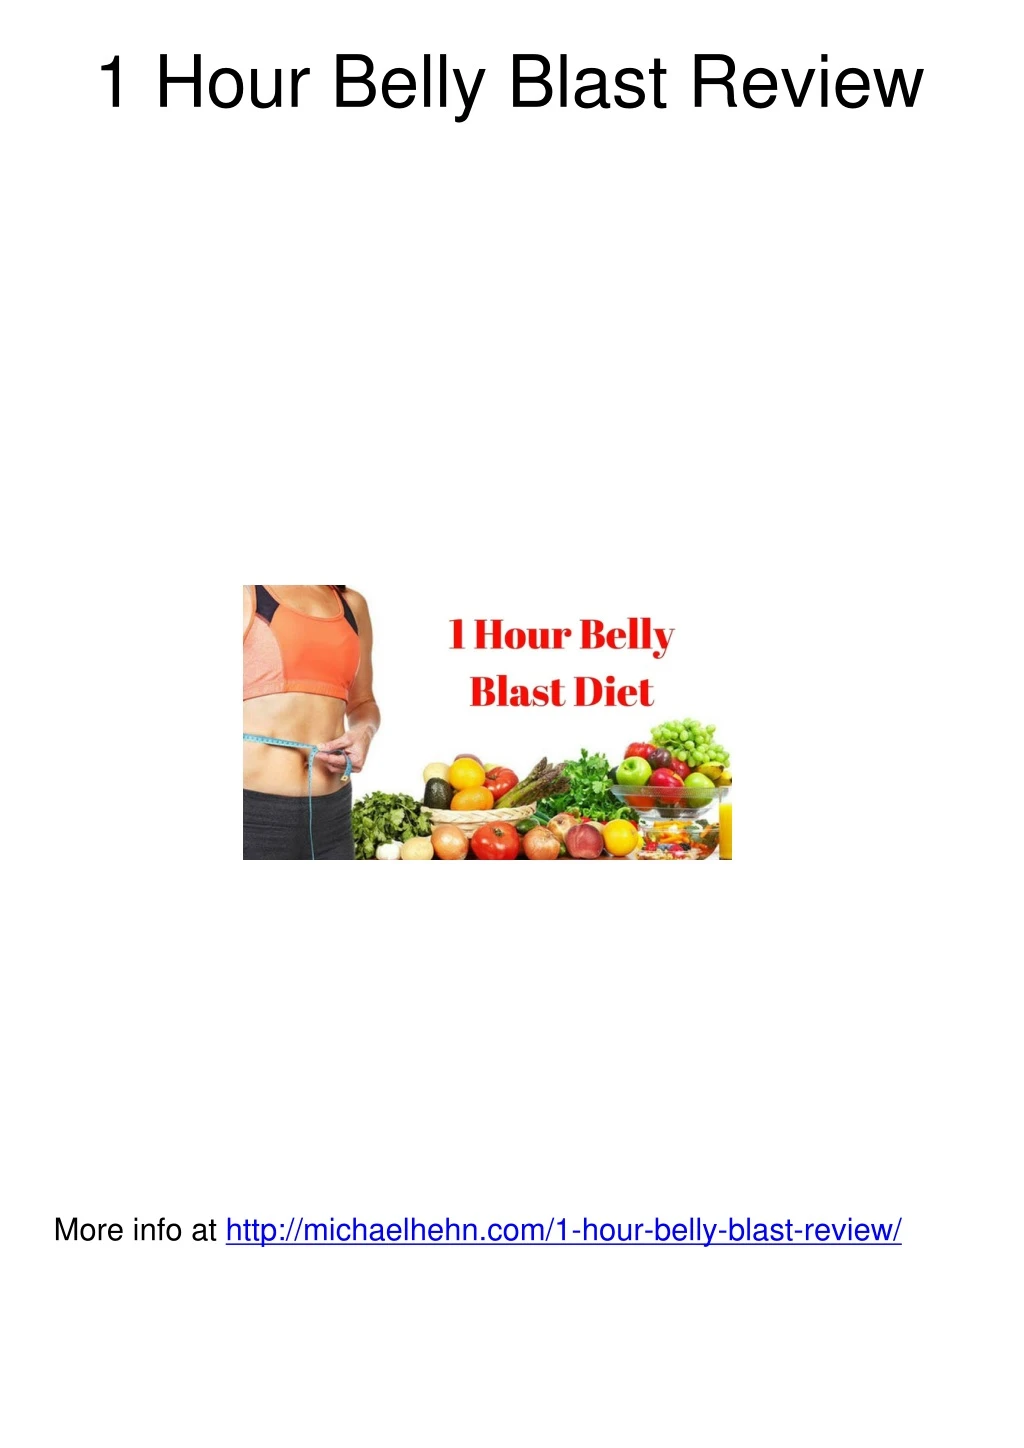 1 hour belly blast review